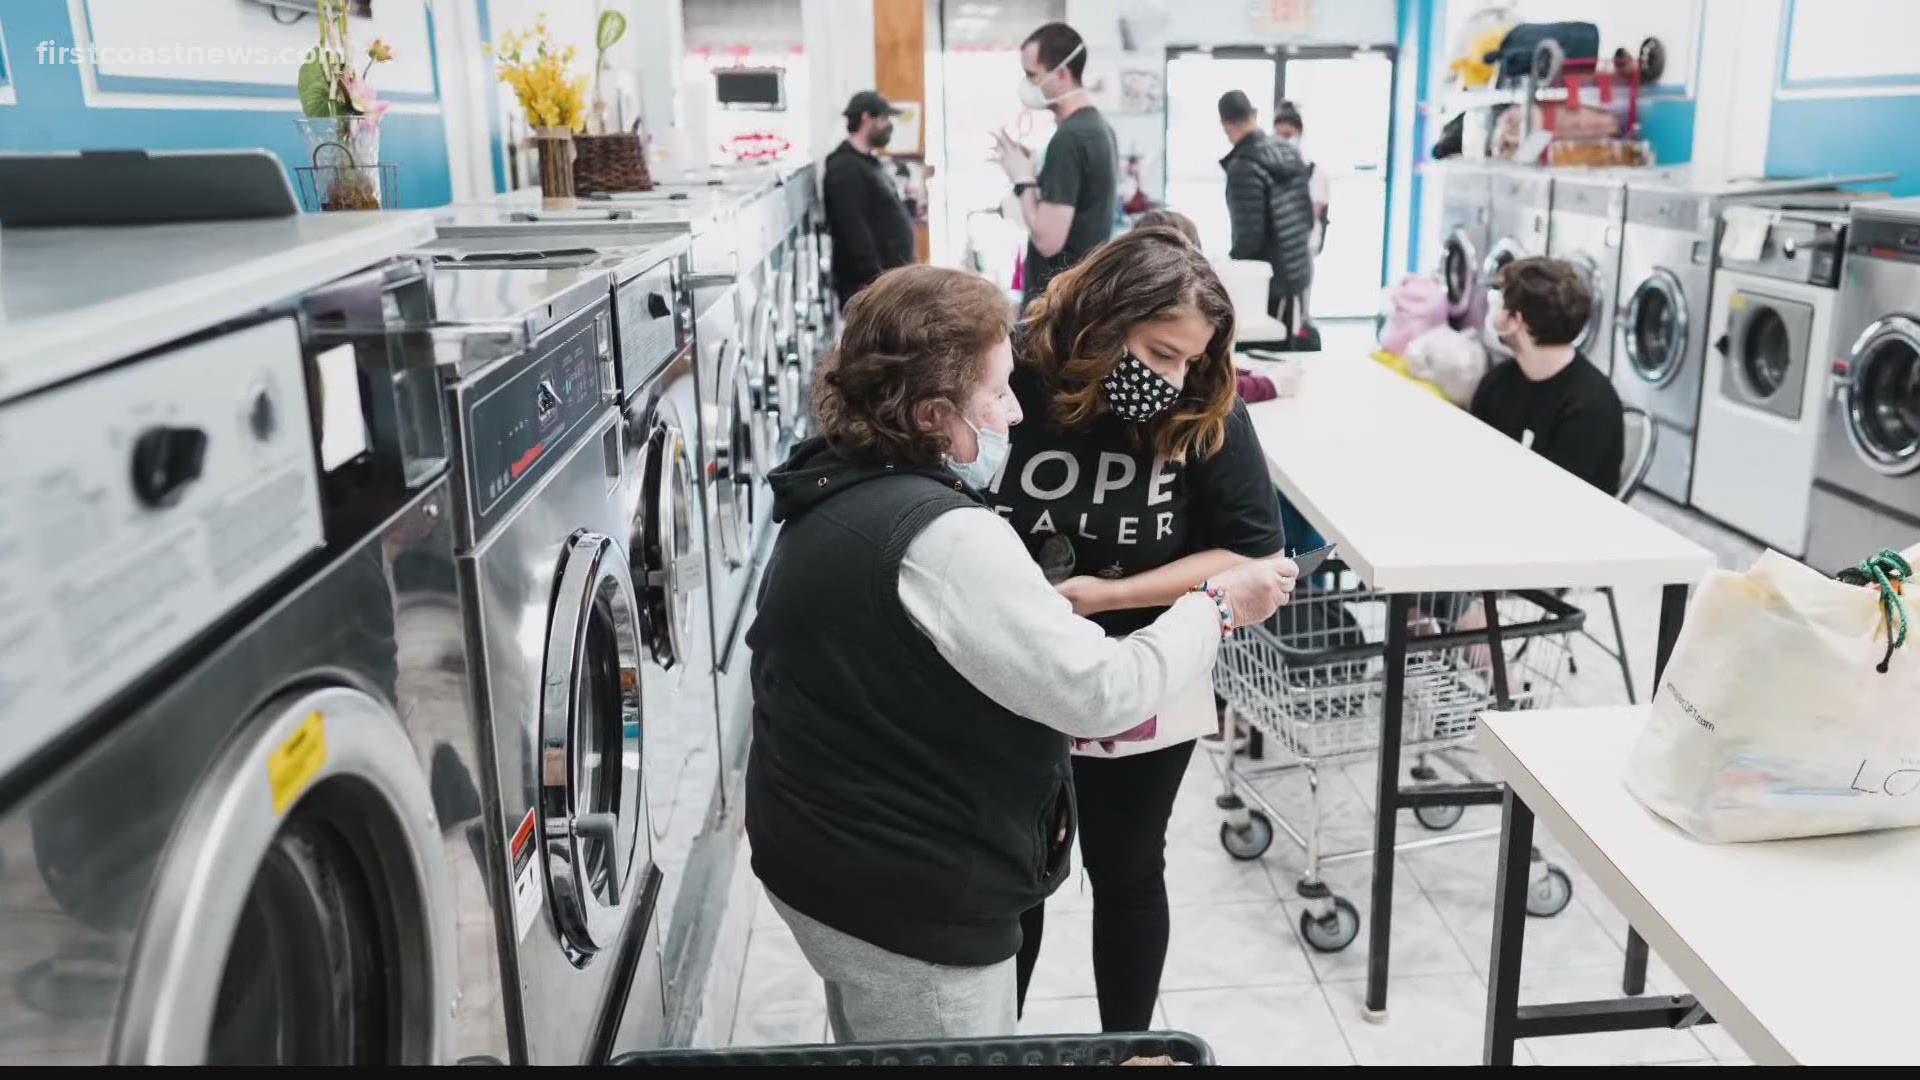 On July 16 from 10 a.m. until 2 p.m. The Laundry Project will be providing free laundry services at a Jacksonville laundromat to help those in need.